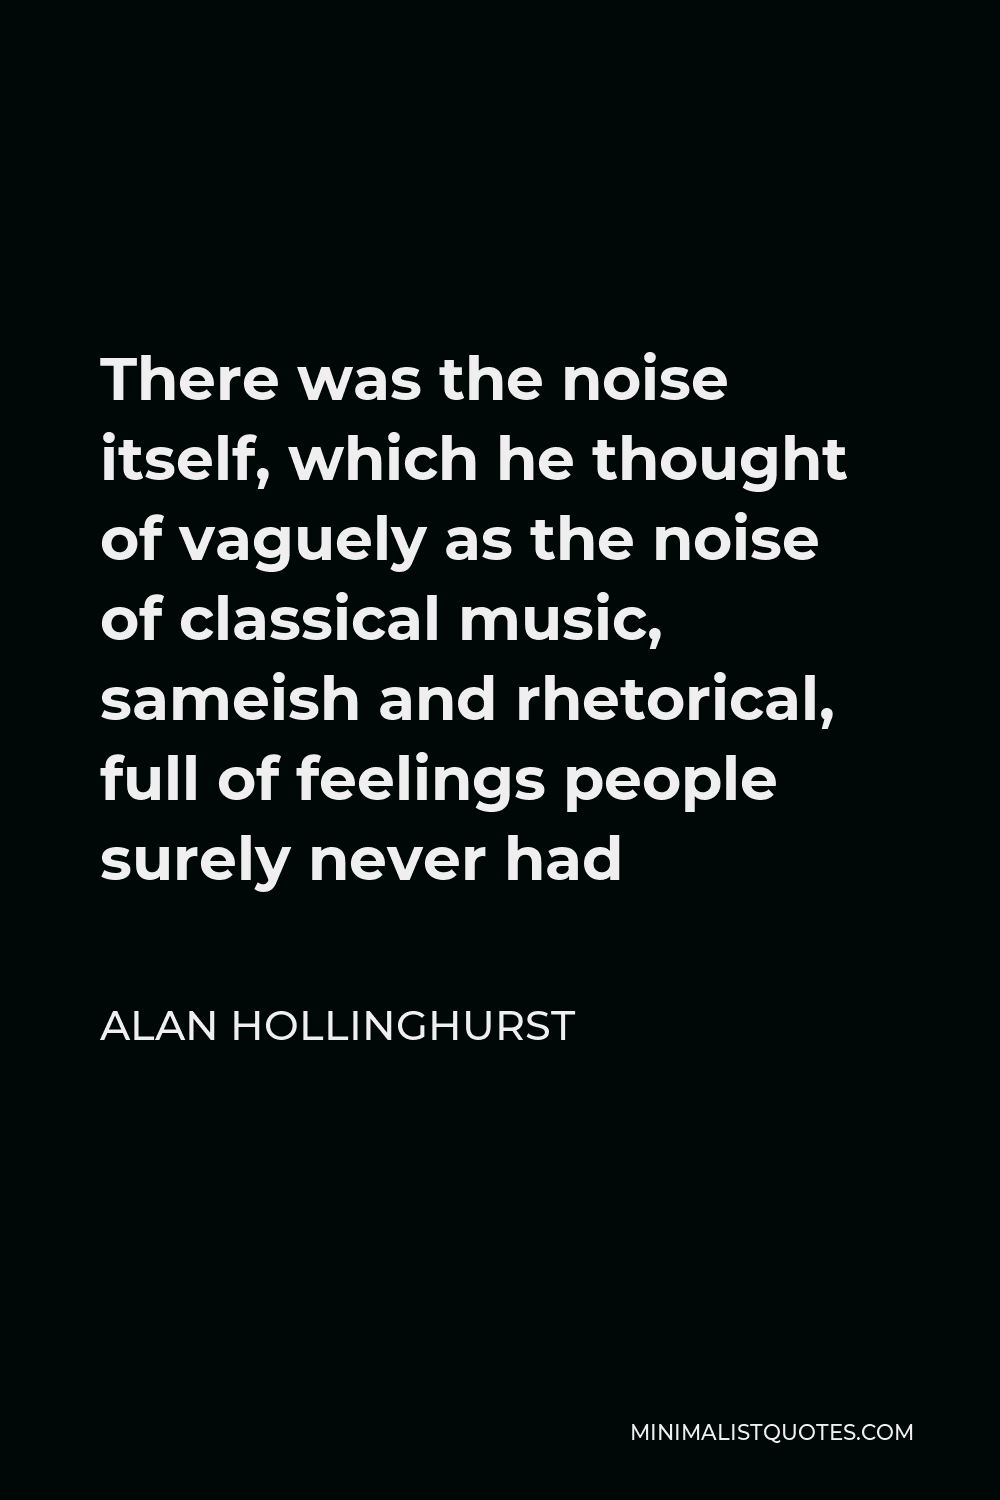 Alan Hollinghurst Quote - There was the noise itself, which he thought of vaguely as the noise of classical music, sameish and rhetorical, full of feelings people surely never had